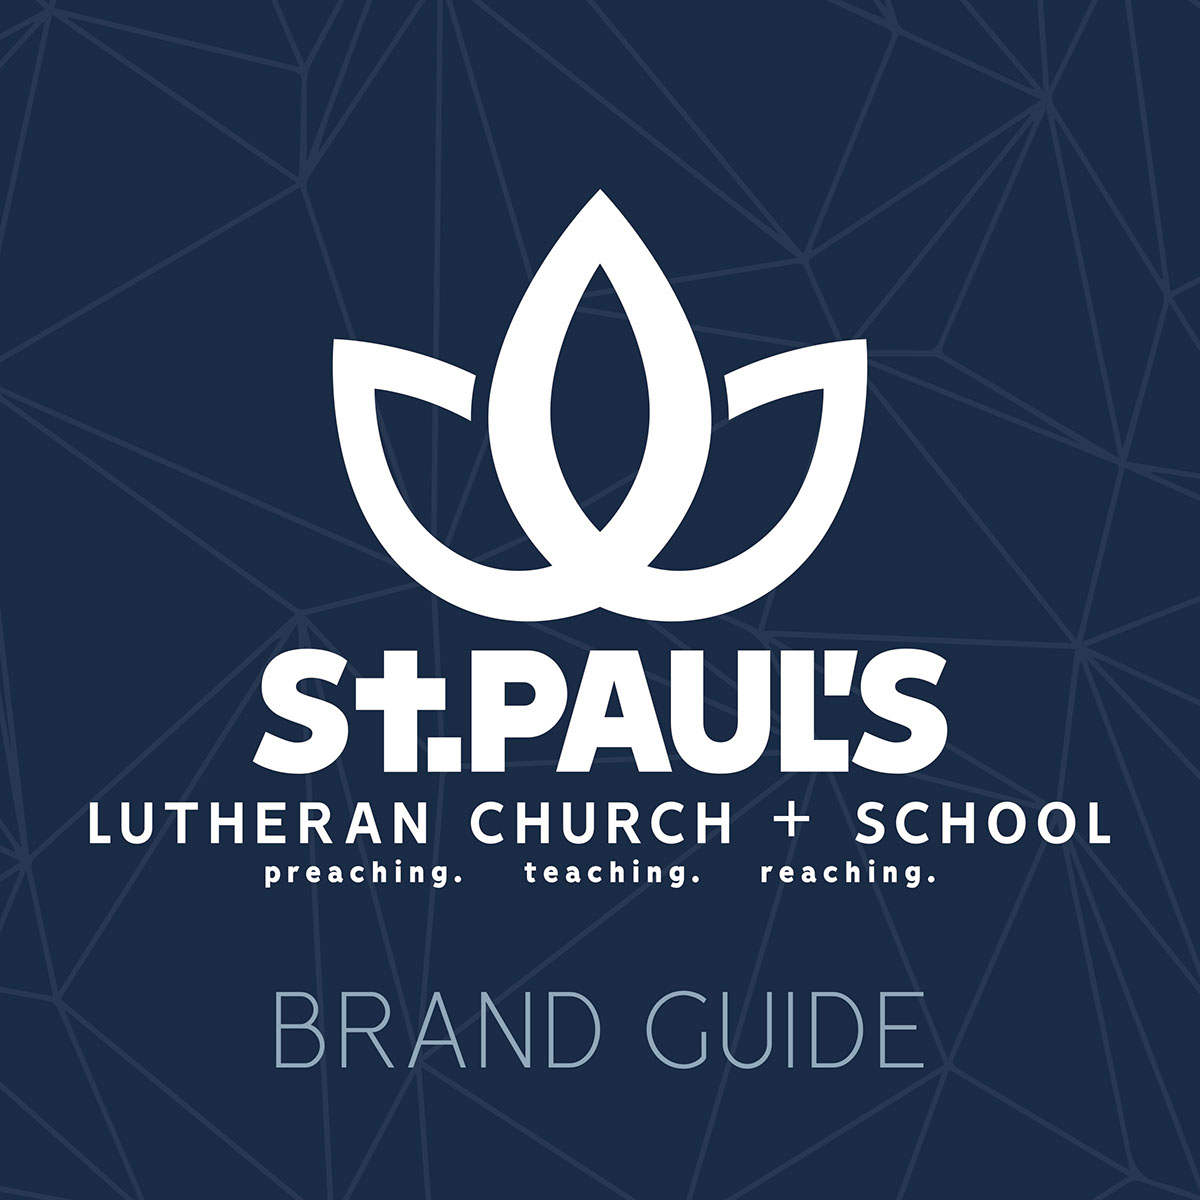 St Pauls Brand Guide rendition image